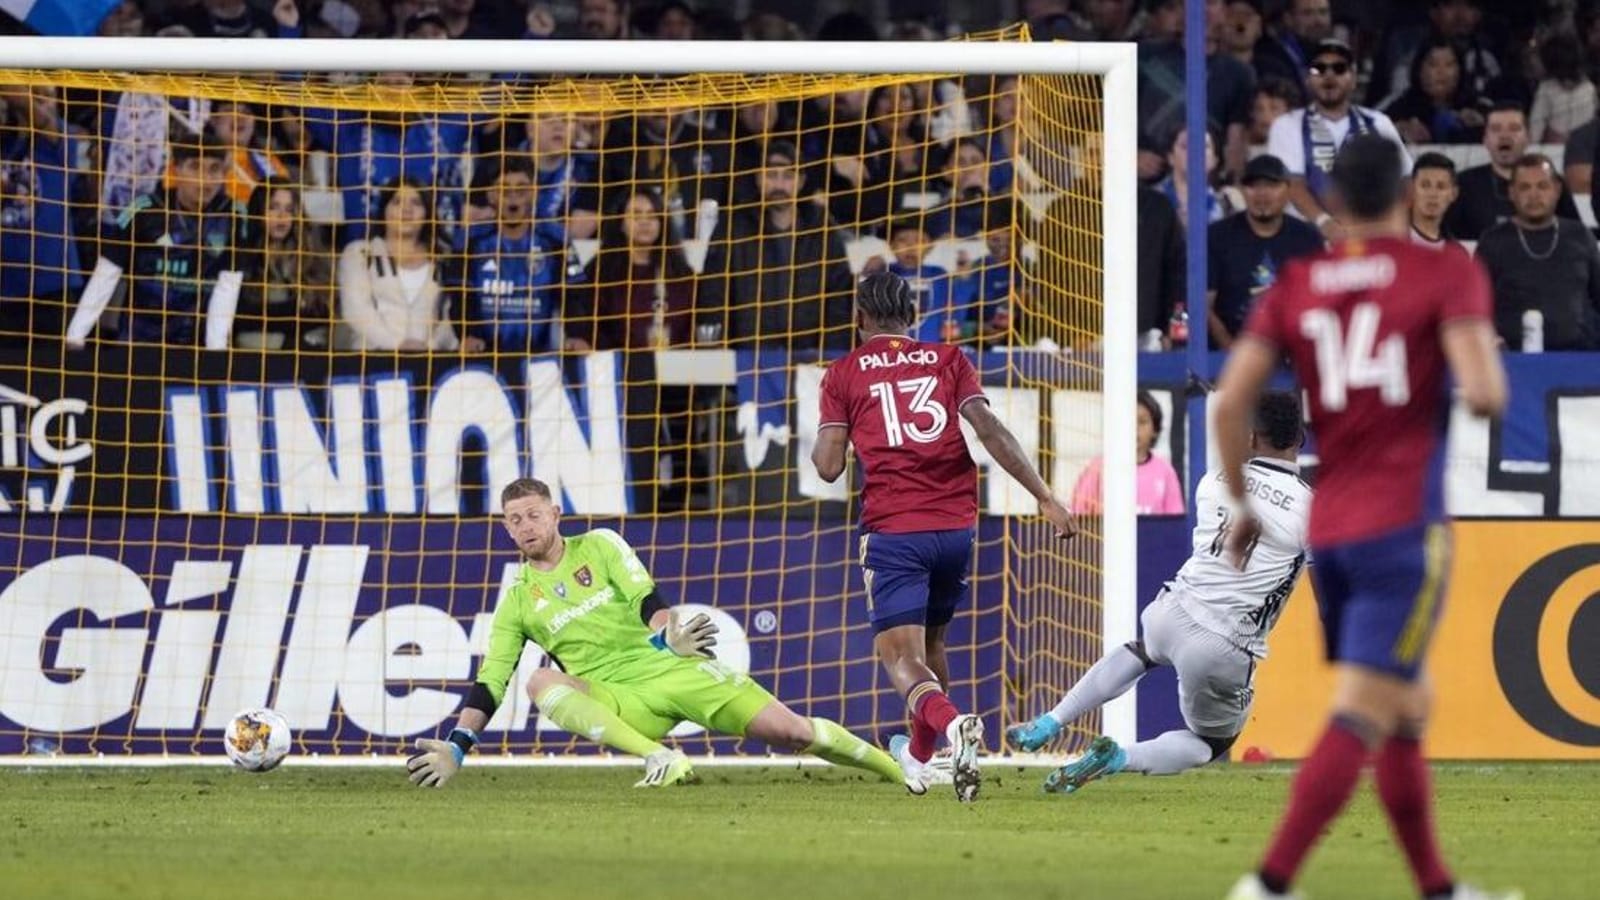 Earthquakes inch closer to playoffs with 2-1 defeat of Real Salt Lake